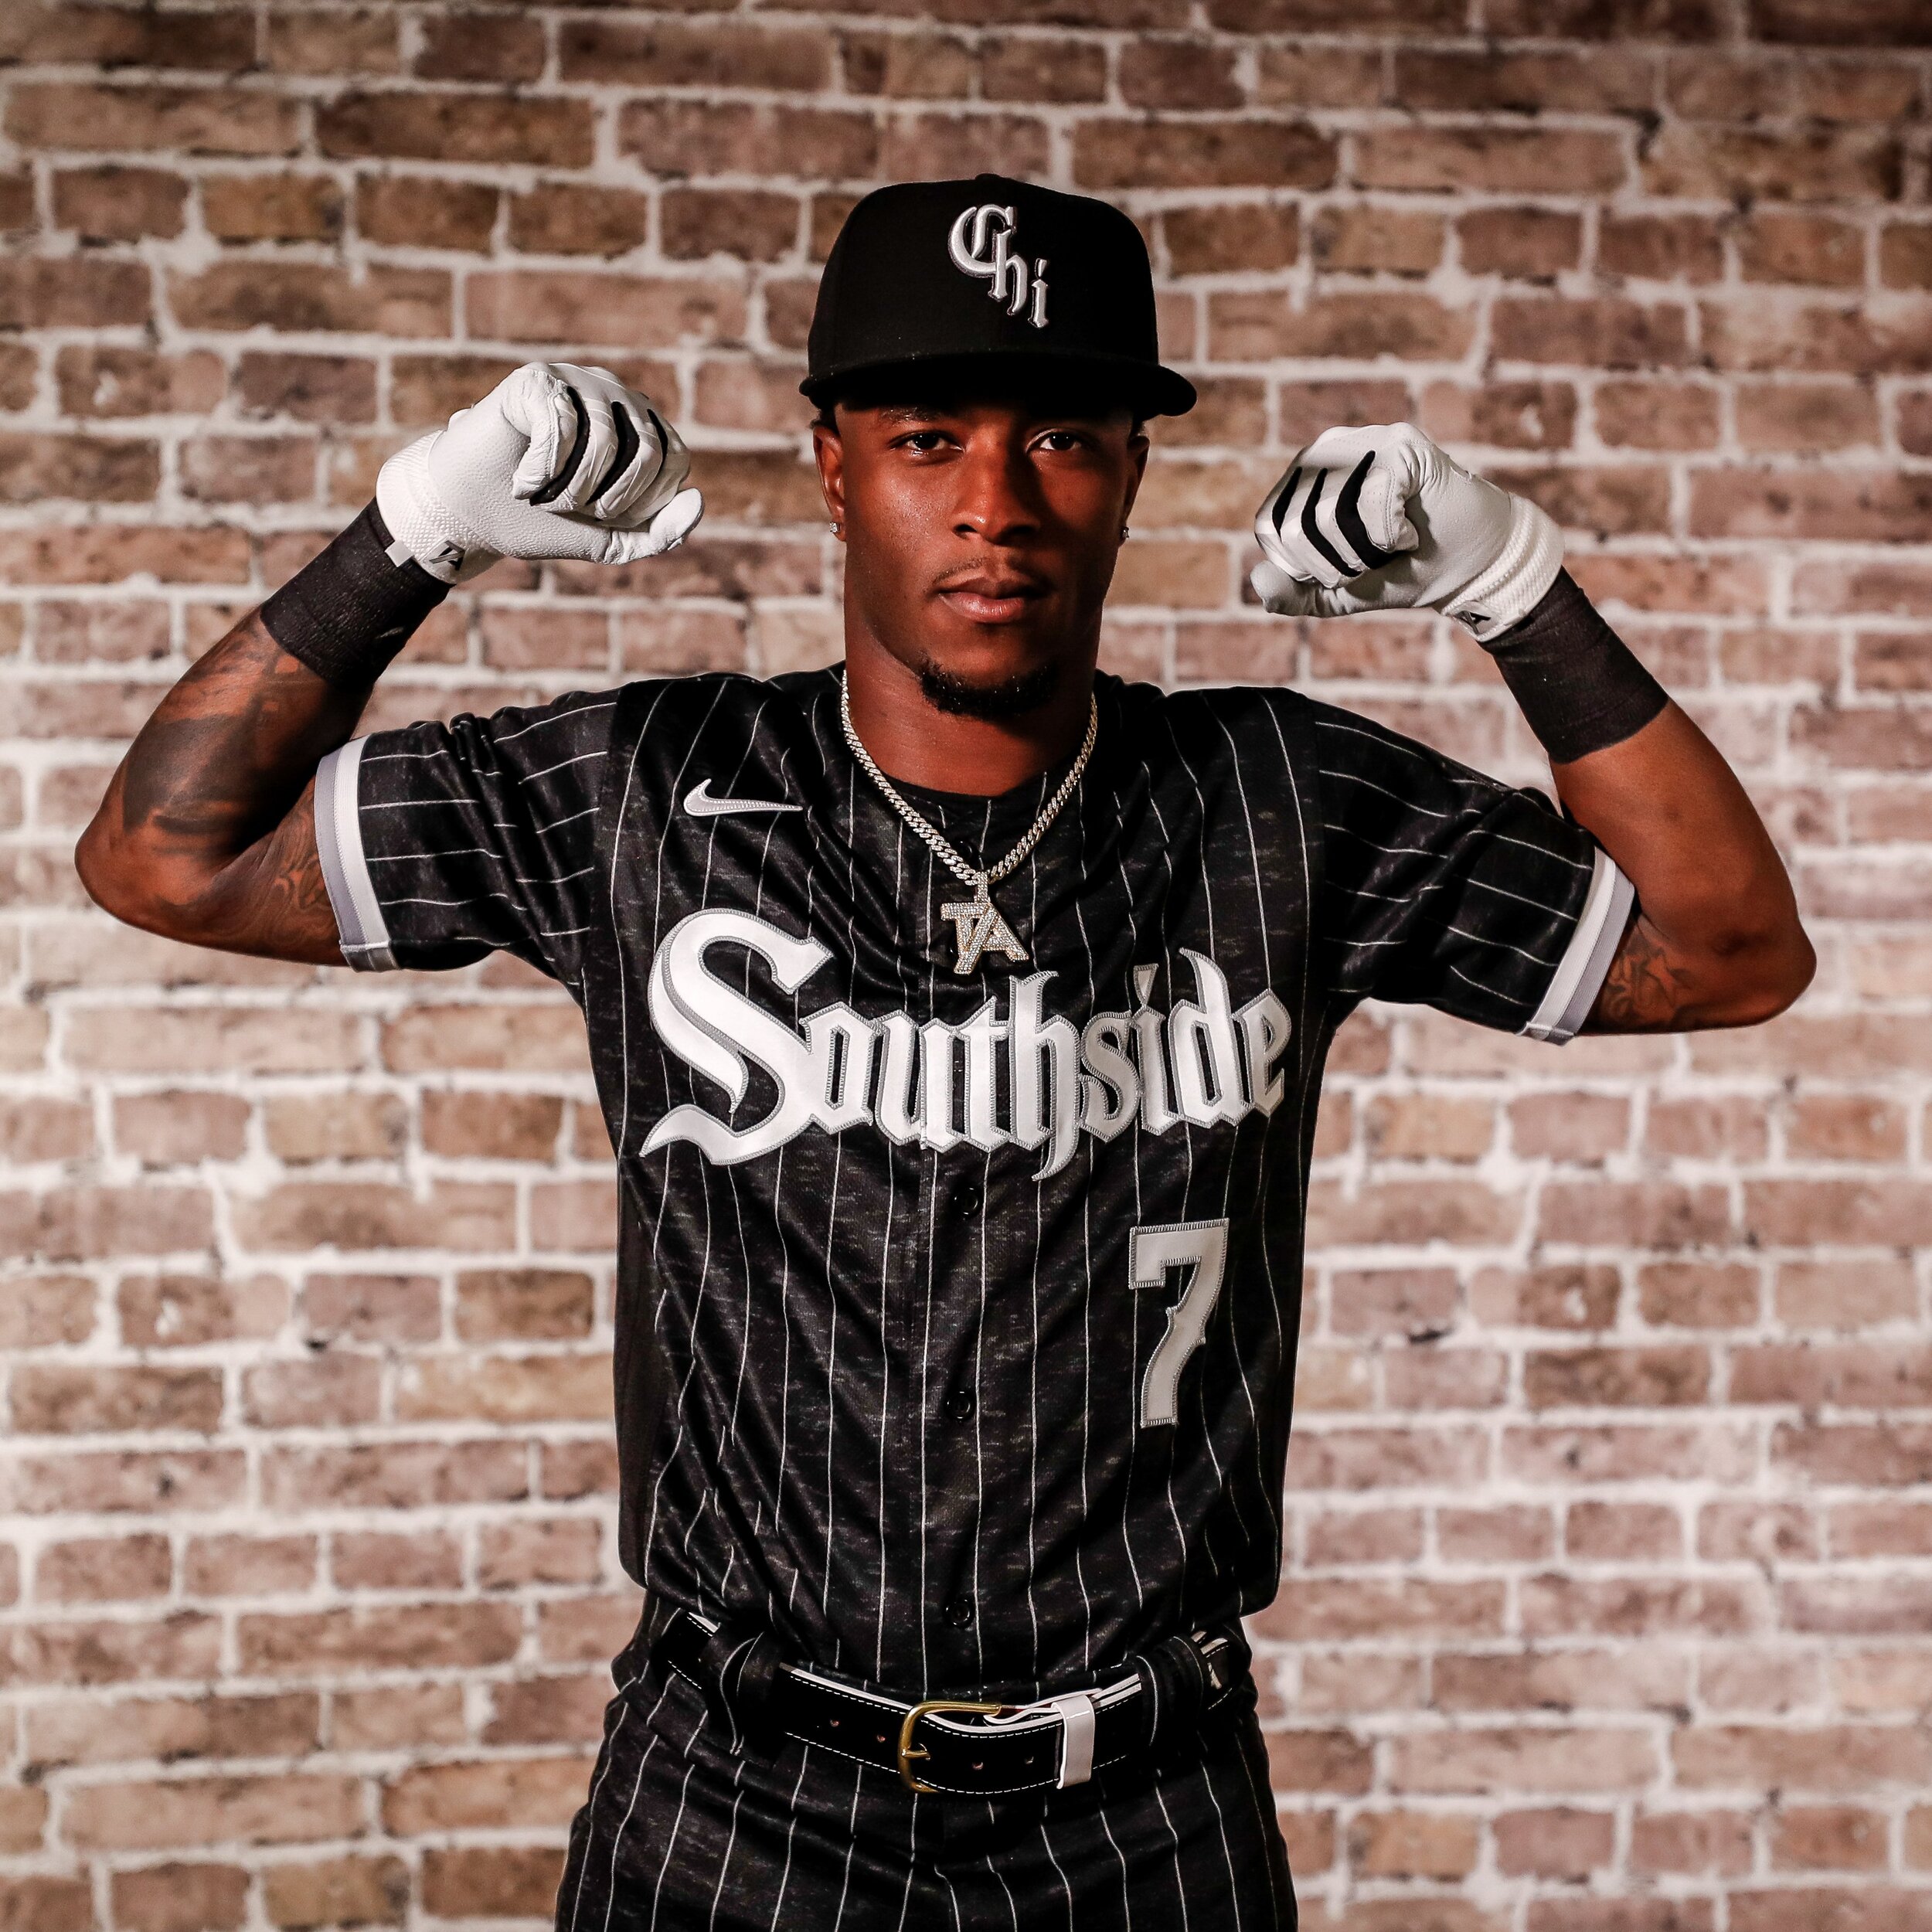 mlb city connect white sox